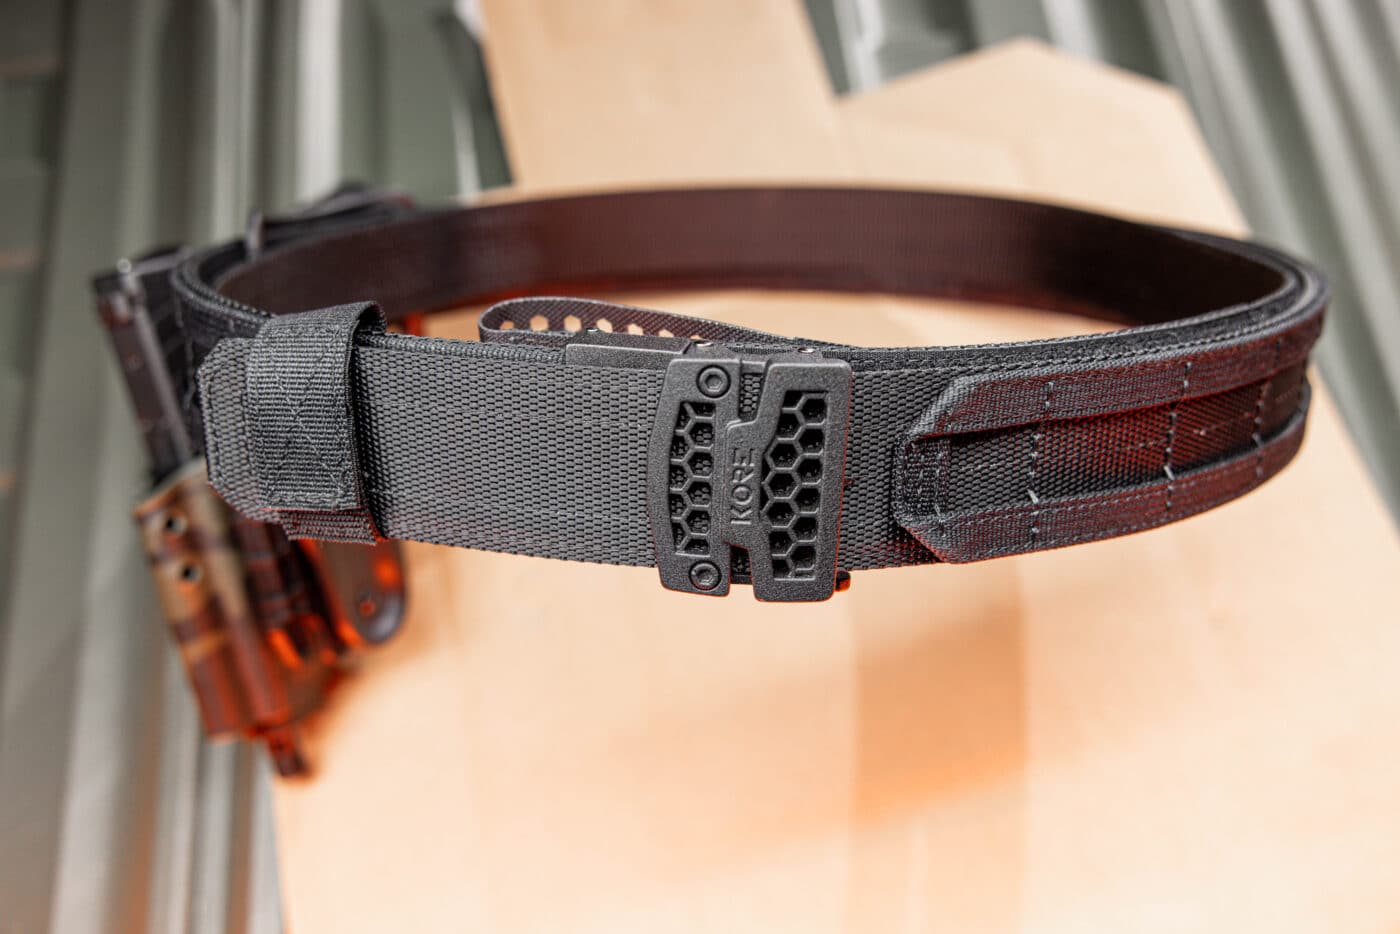 Duty and battle belt by Kore Essentials